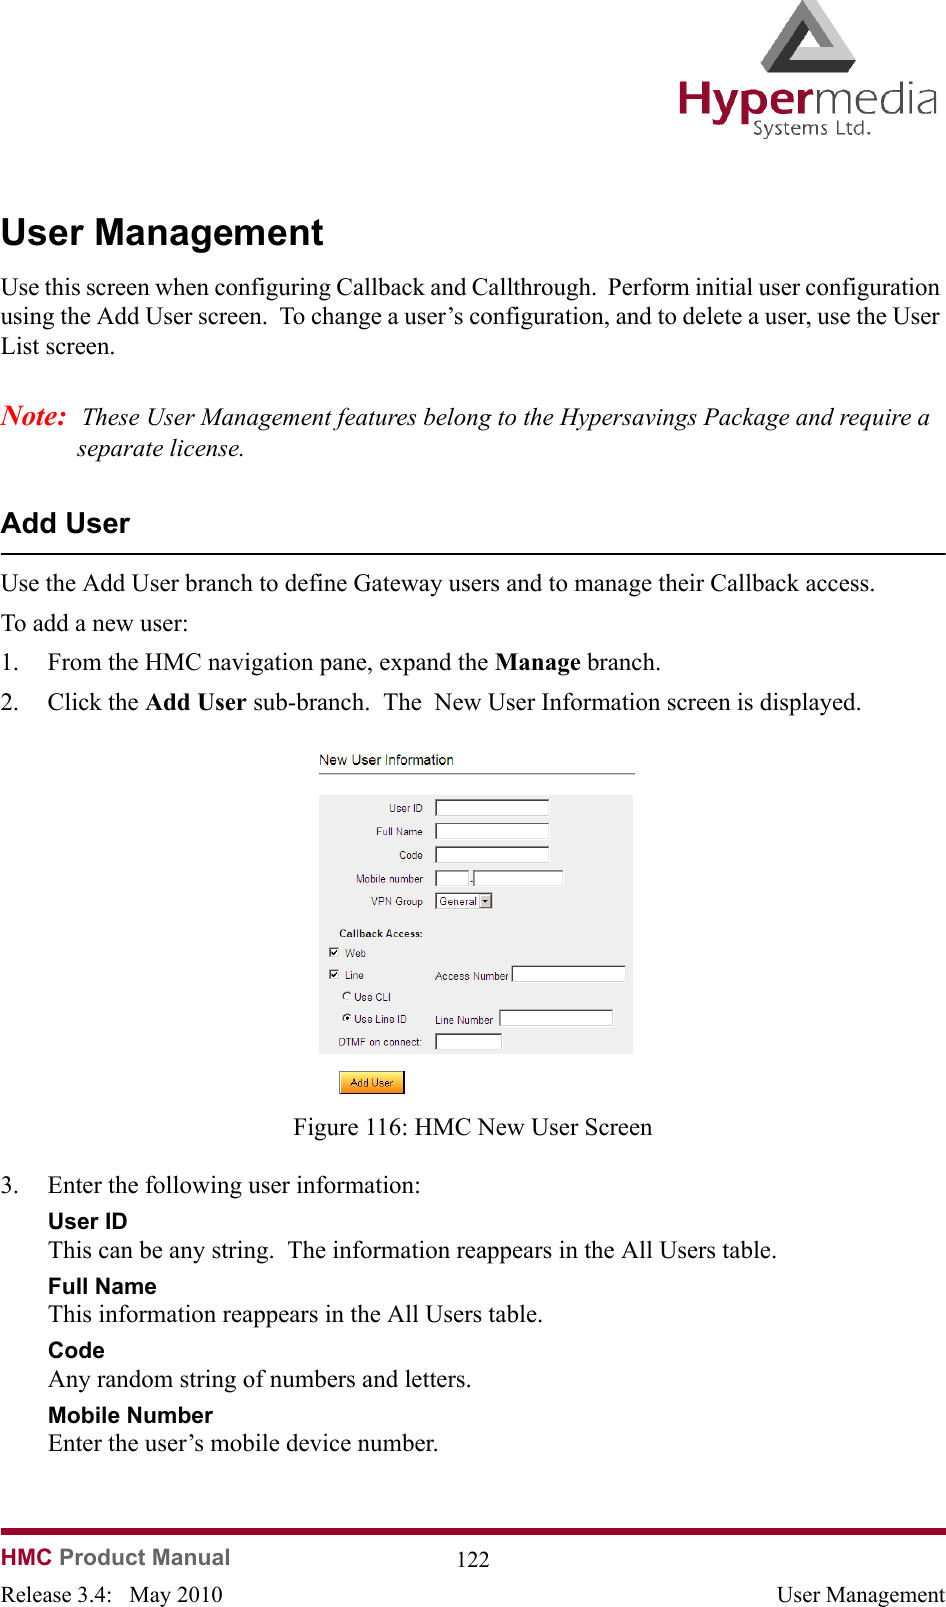   HMC Product Manual  122Release 3.4:   May 2010 User ManagementUser ManagementUse this screen when configuring Callback and Callthrough.  Perform initial user configuration using the Add User screen.  To change a user’s configuration, and to delete a user, use the User List screen.Note:  These User Management features belong to the Hypersavings Package and require a separate license.Add UserUse the Add User branch to define Gateway users and to manage their Callback access.To add a new user:1. From the HMC navigation pane, expand the Manage branch.2. Click the Add User sub-branch.  The  New User Information screen is displayed.              Figure 116: HMC New User Screen3. Enter the following user information:User IDThis can be any string.  The information reappears in the All Users table.Full NameThis information reappears in the All Users table.CodeAny random string of numbers and letters.Mobile NumberEnter the user’s mobile device number. 